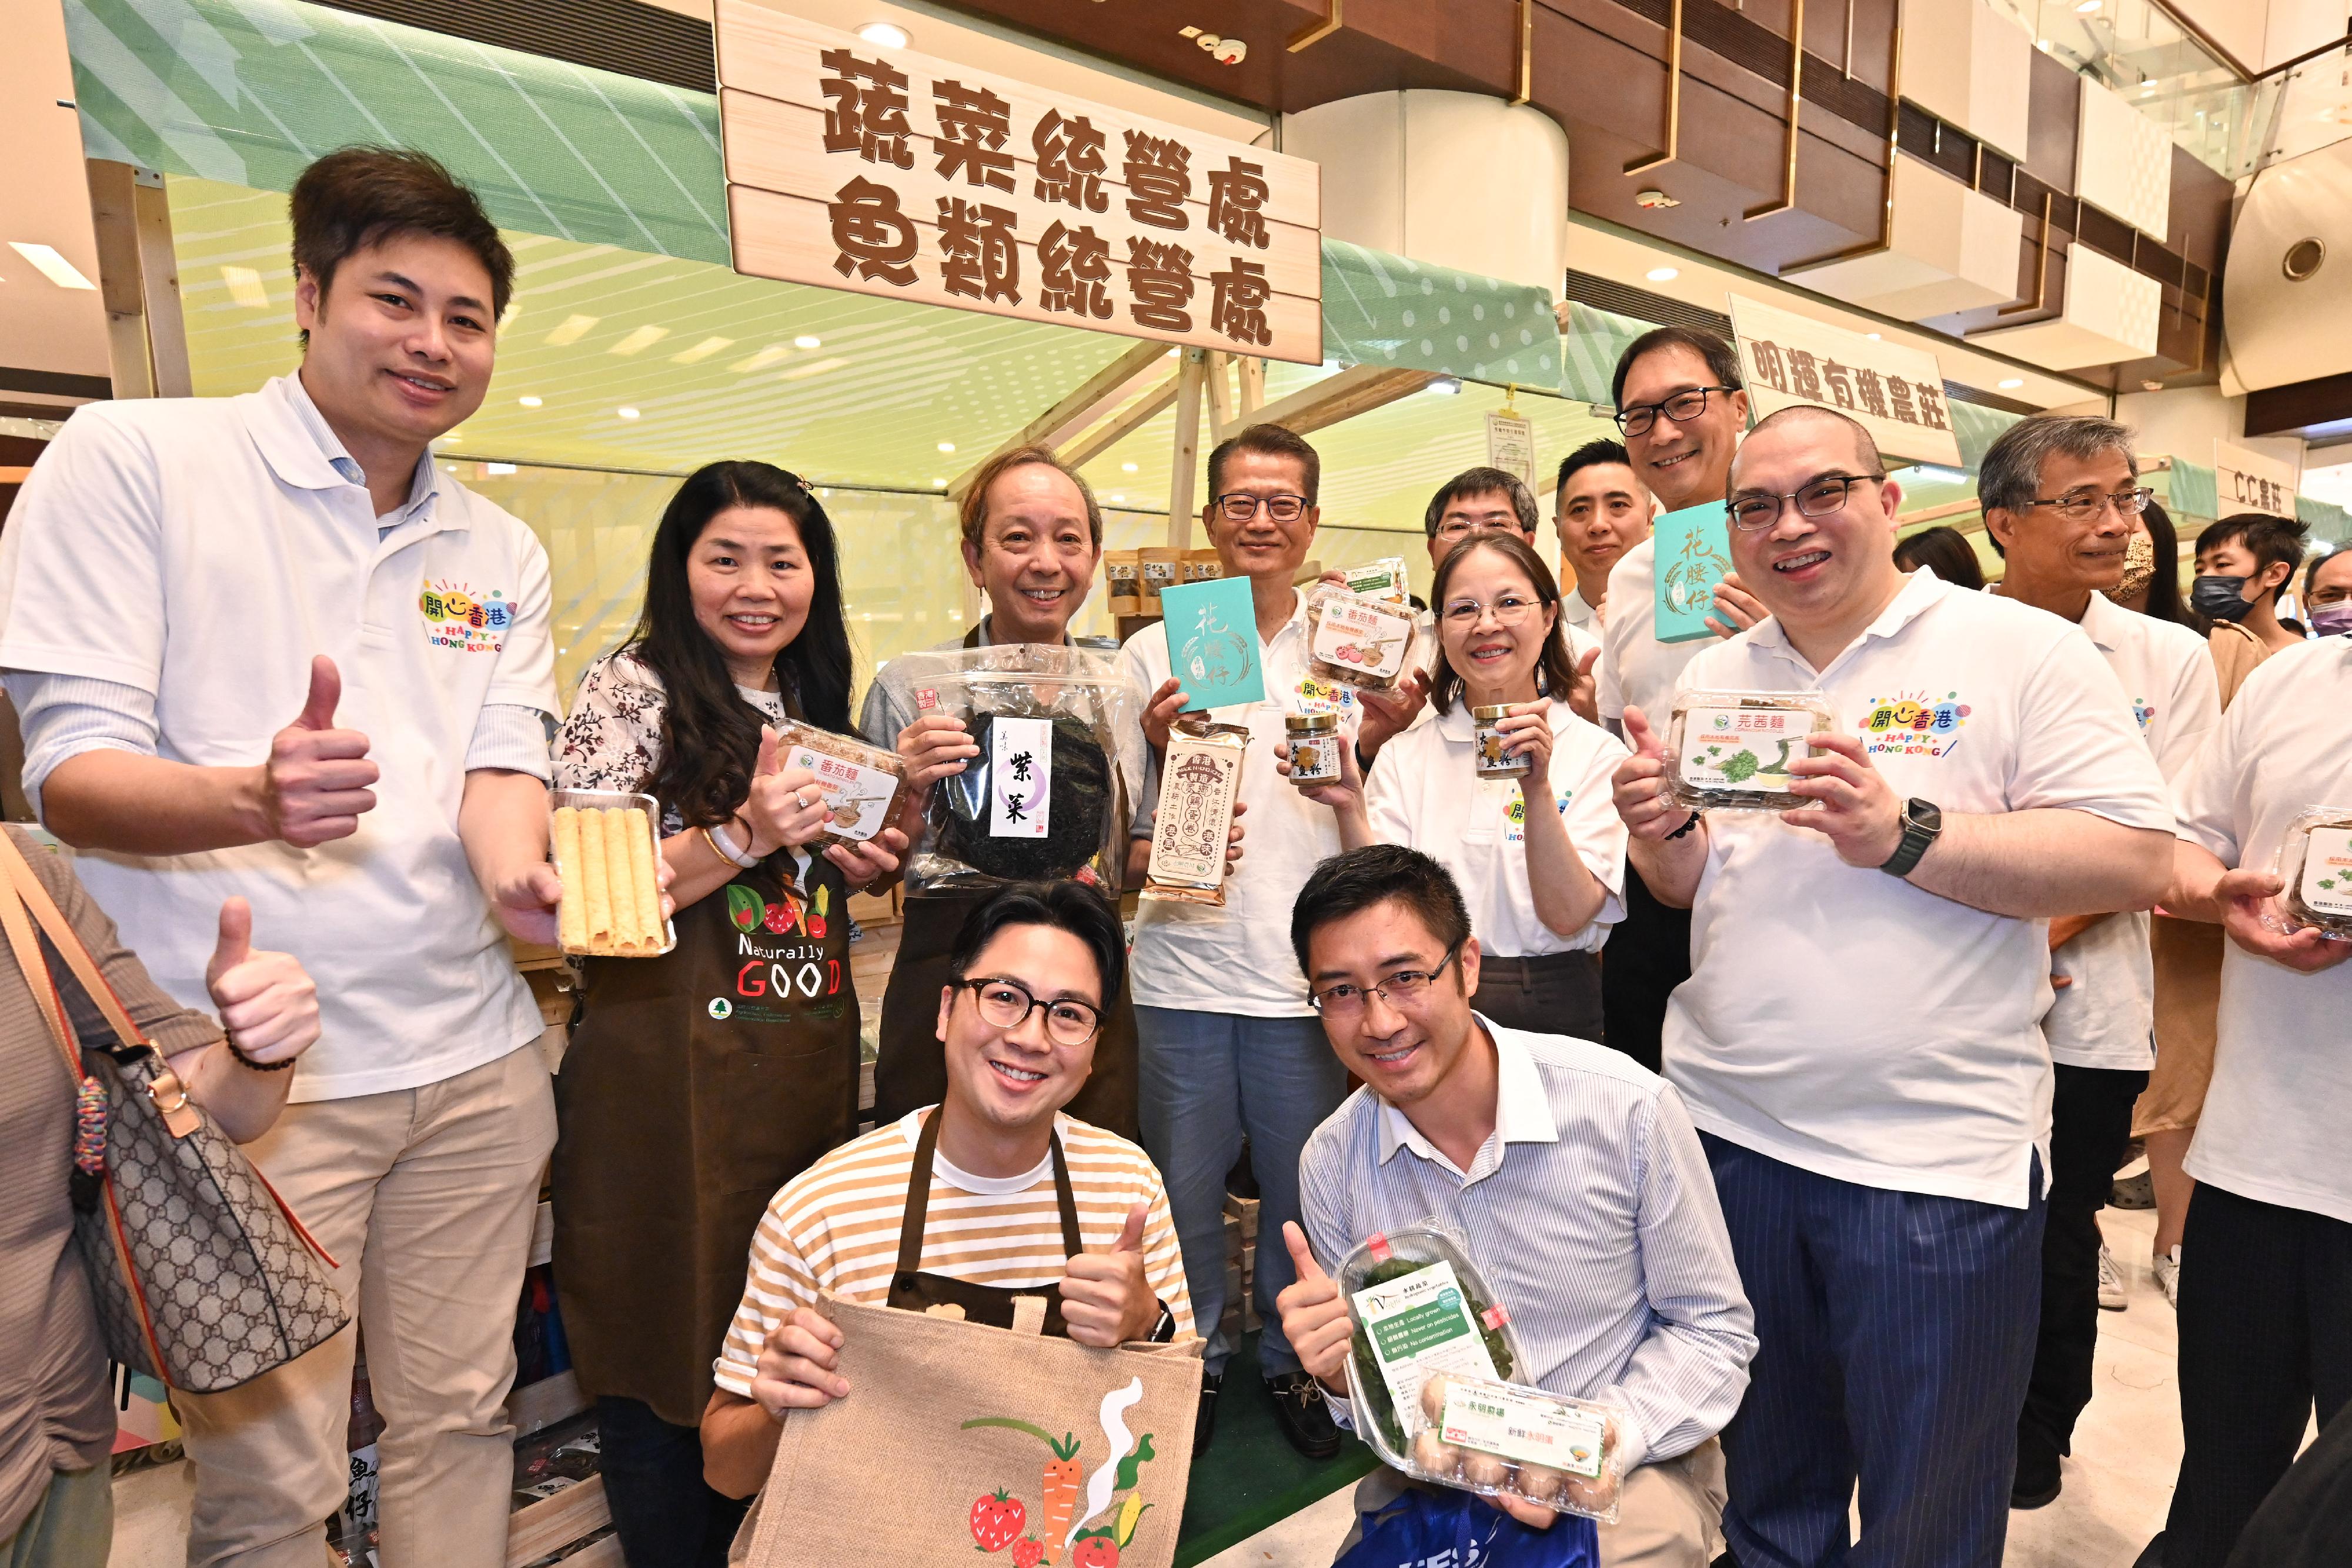 The Financial Secretary, Mr Paul Chan, attended the opening ceremony of the Happy Hong Kong - A and F Carnival: Local Organic Watermelon Festival 2023 today (June 22). Photo shows Mr Chan (second row, third right), accompanied by the Under Secretary for Environment and Ecology, Miss Diane Wong (second row, second right), and the Director of Agriculture, Fisheries and Conservation, Dr Leung Siu-fai (third row, third right), touring the carnival.